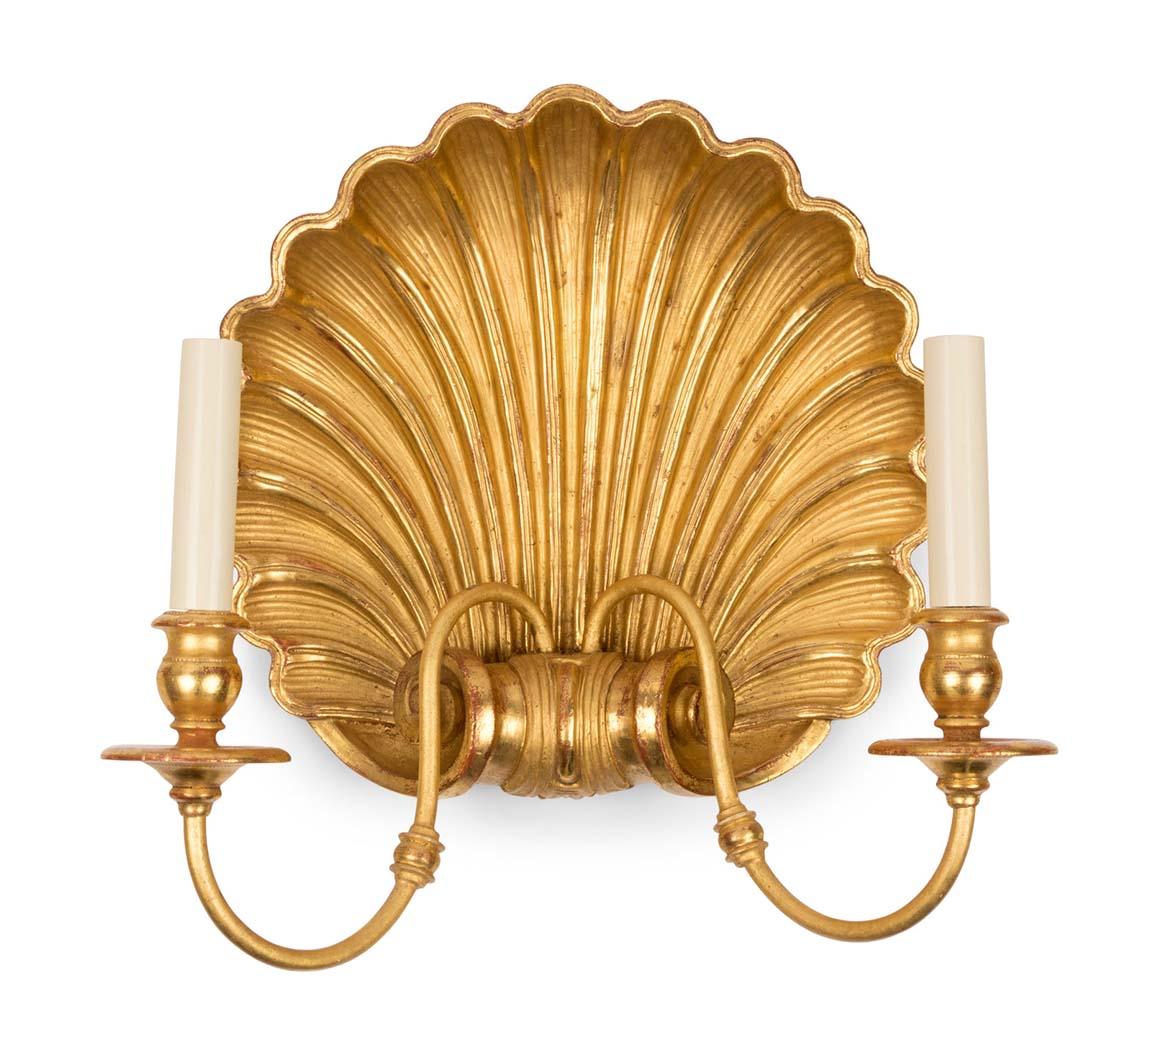 A pair of William Kent inspired shell form sconces carved in giltwood backplate issuing two candle arms with burnished gilt finish. Circa 1980. Measures: Height 14